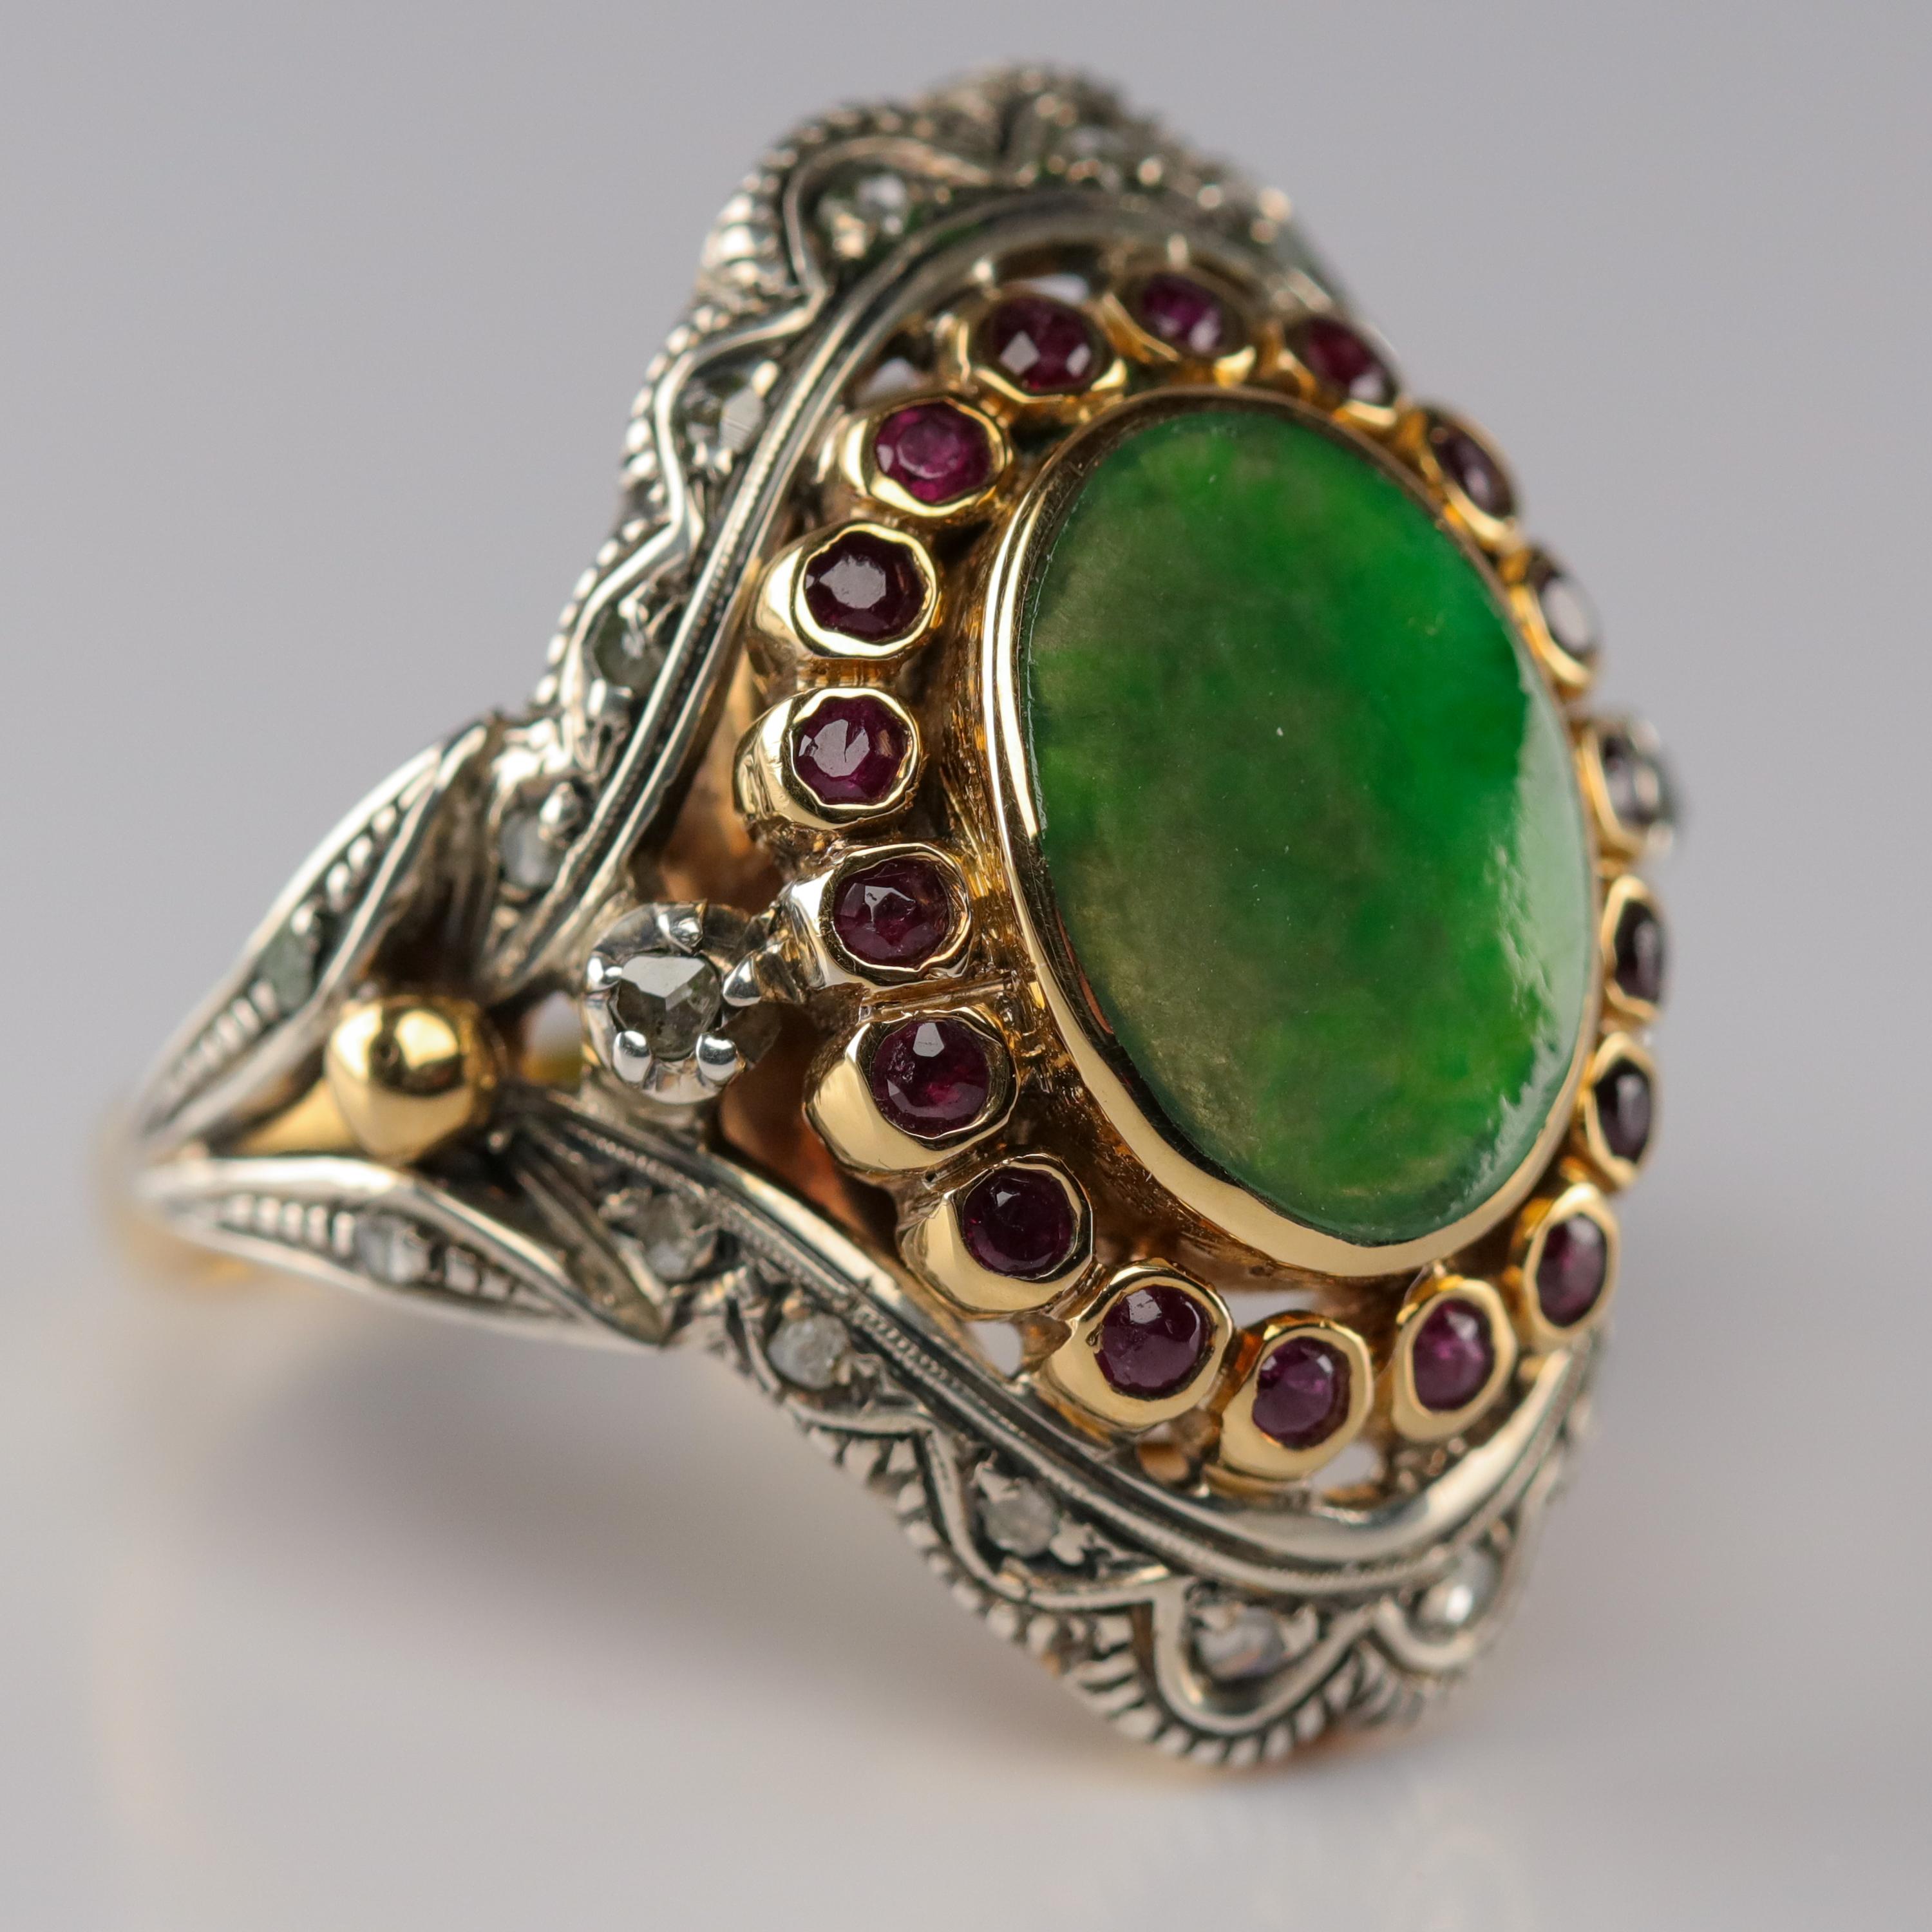 Victorian Antique Jade Ring with Rubies & Diamonds in Gold and Silver Eccentric and Ornate